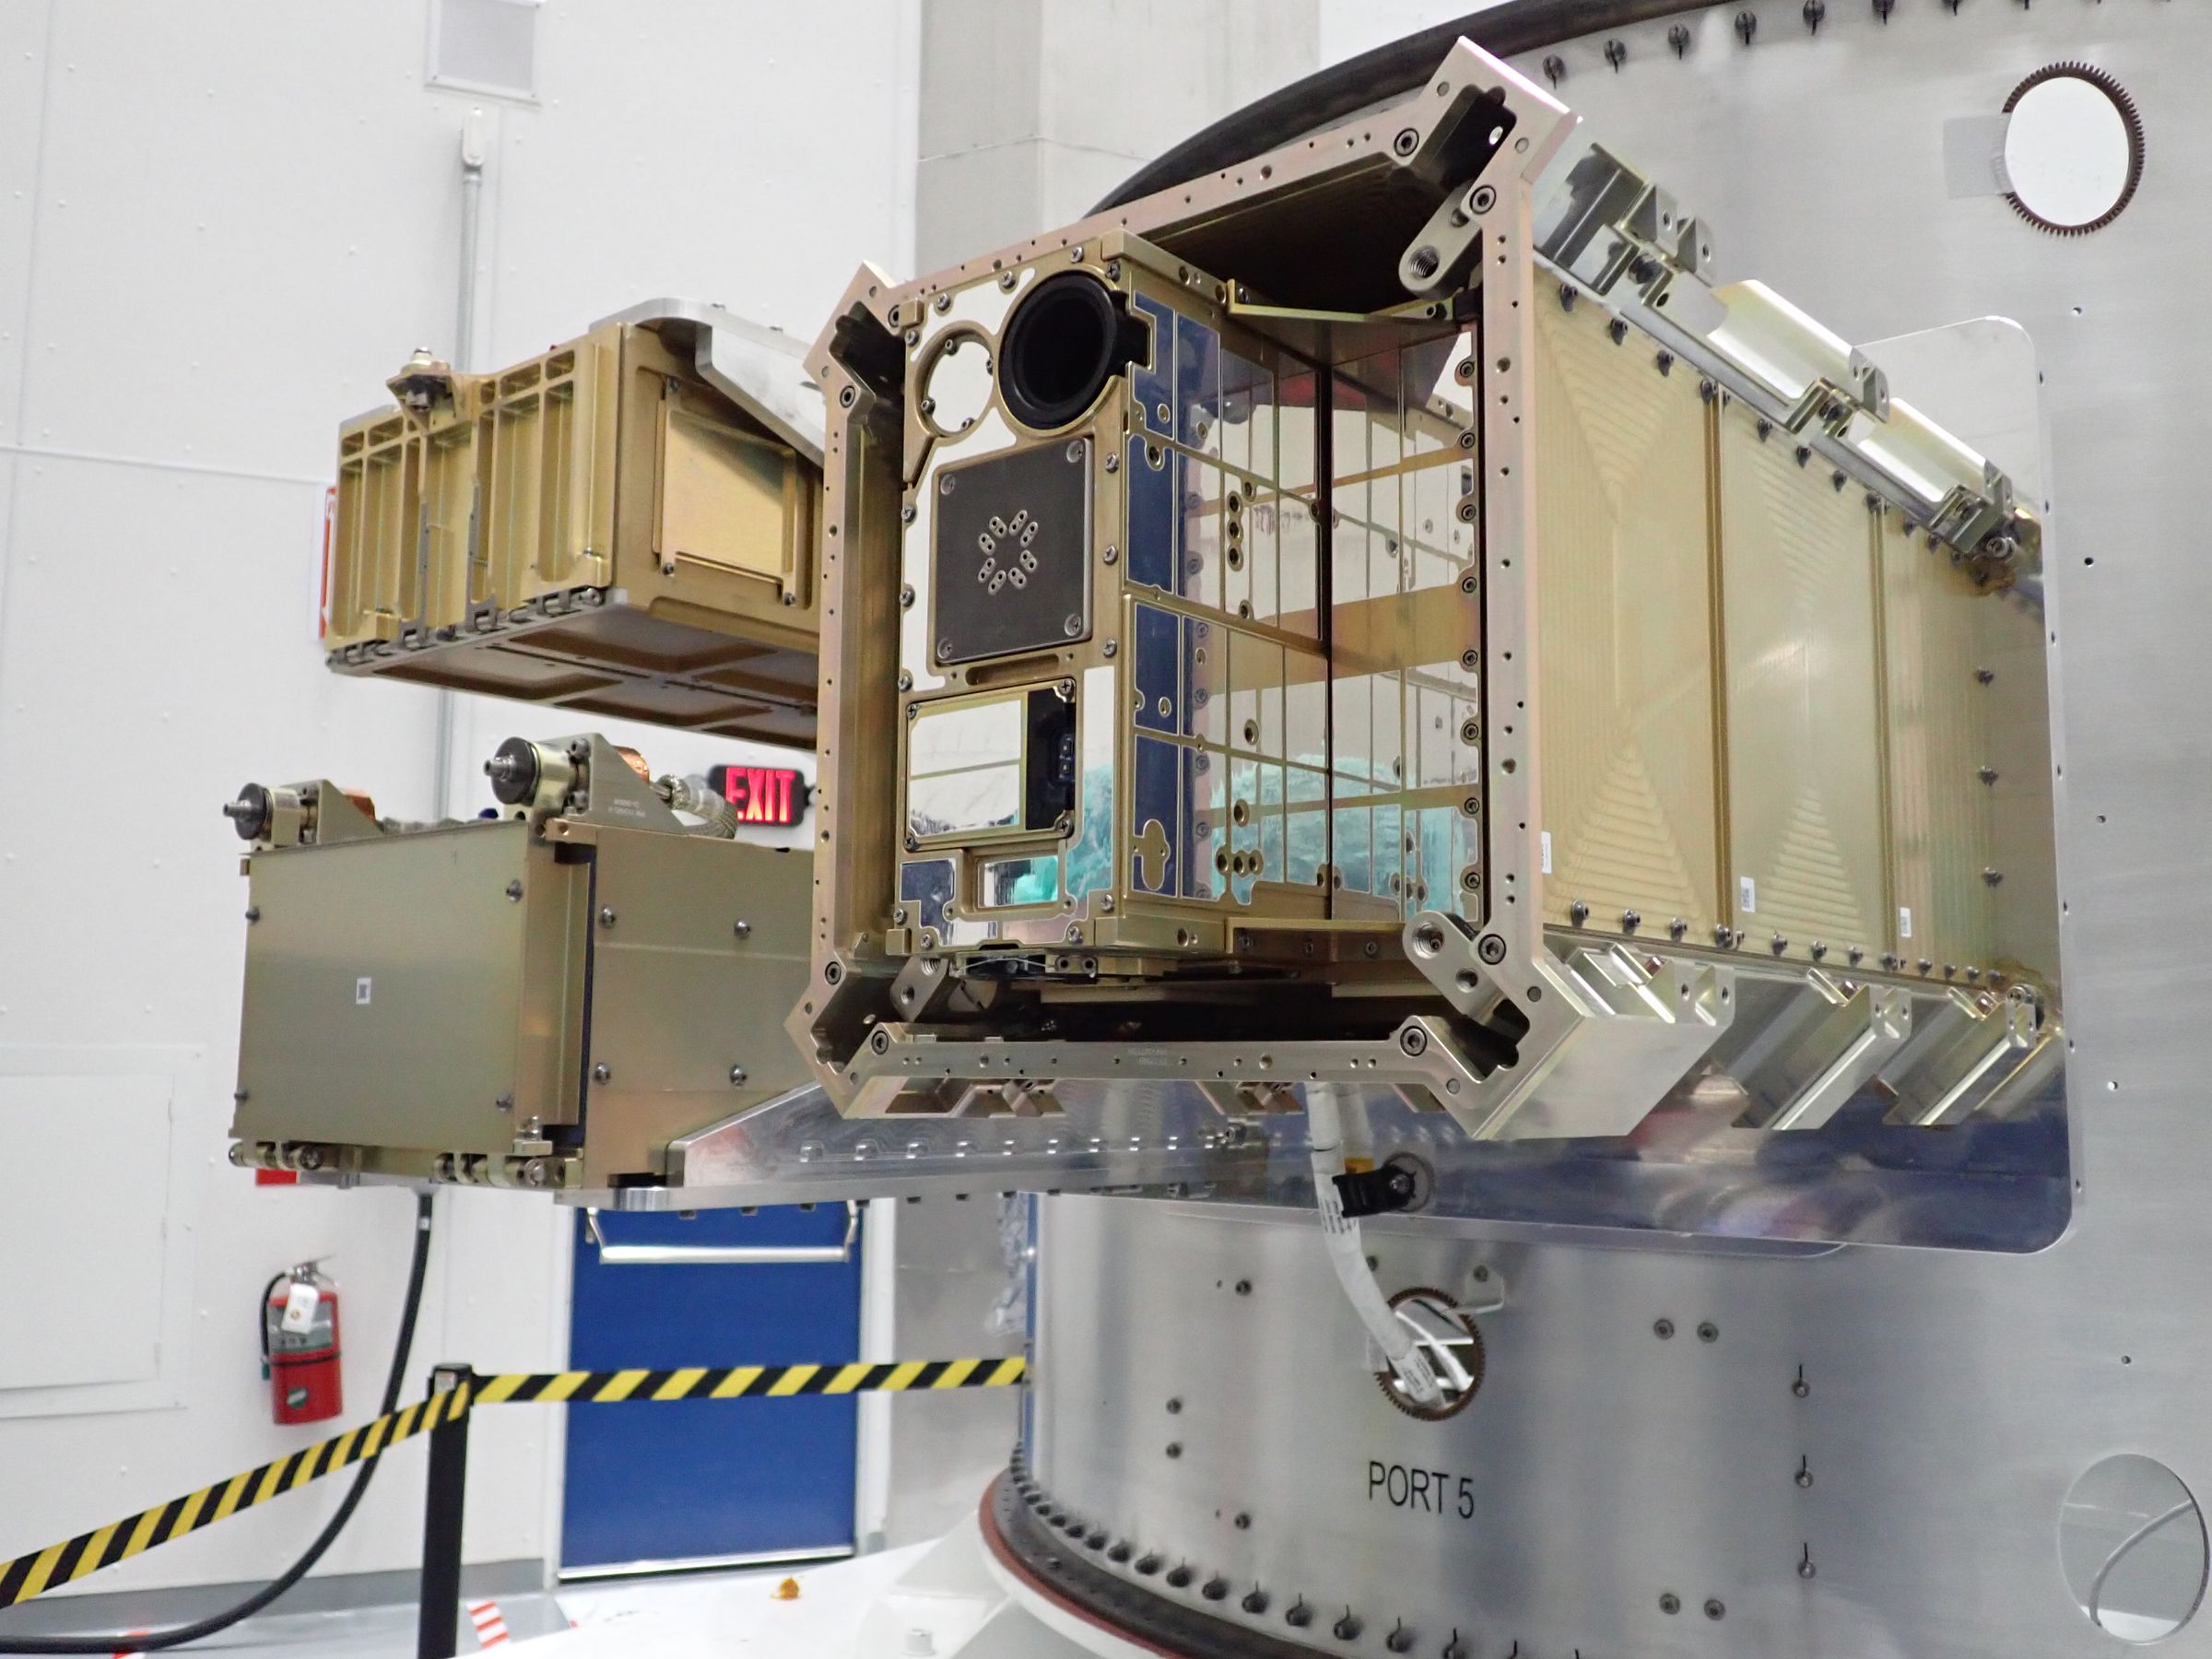 Tyvak’s two nano-satellites sitting in a payload adapter ahead of SpaceX’s Transporter-2 mission.